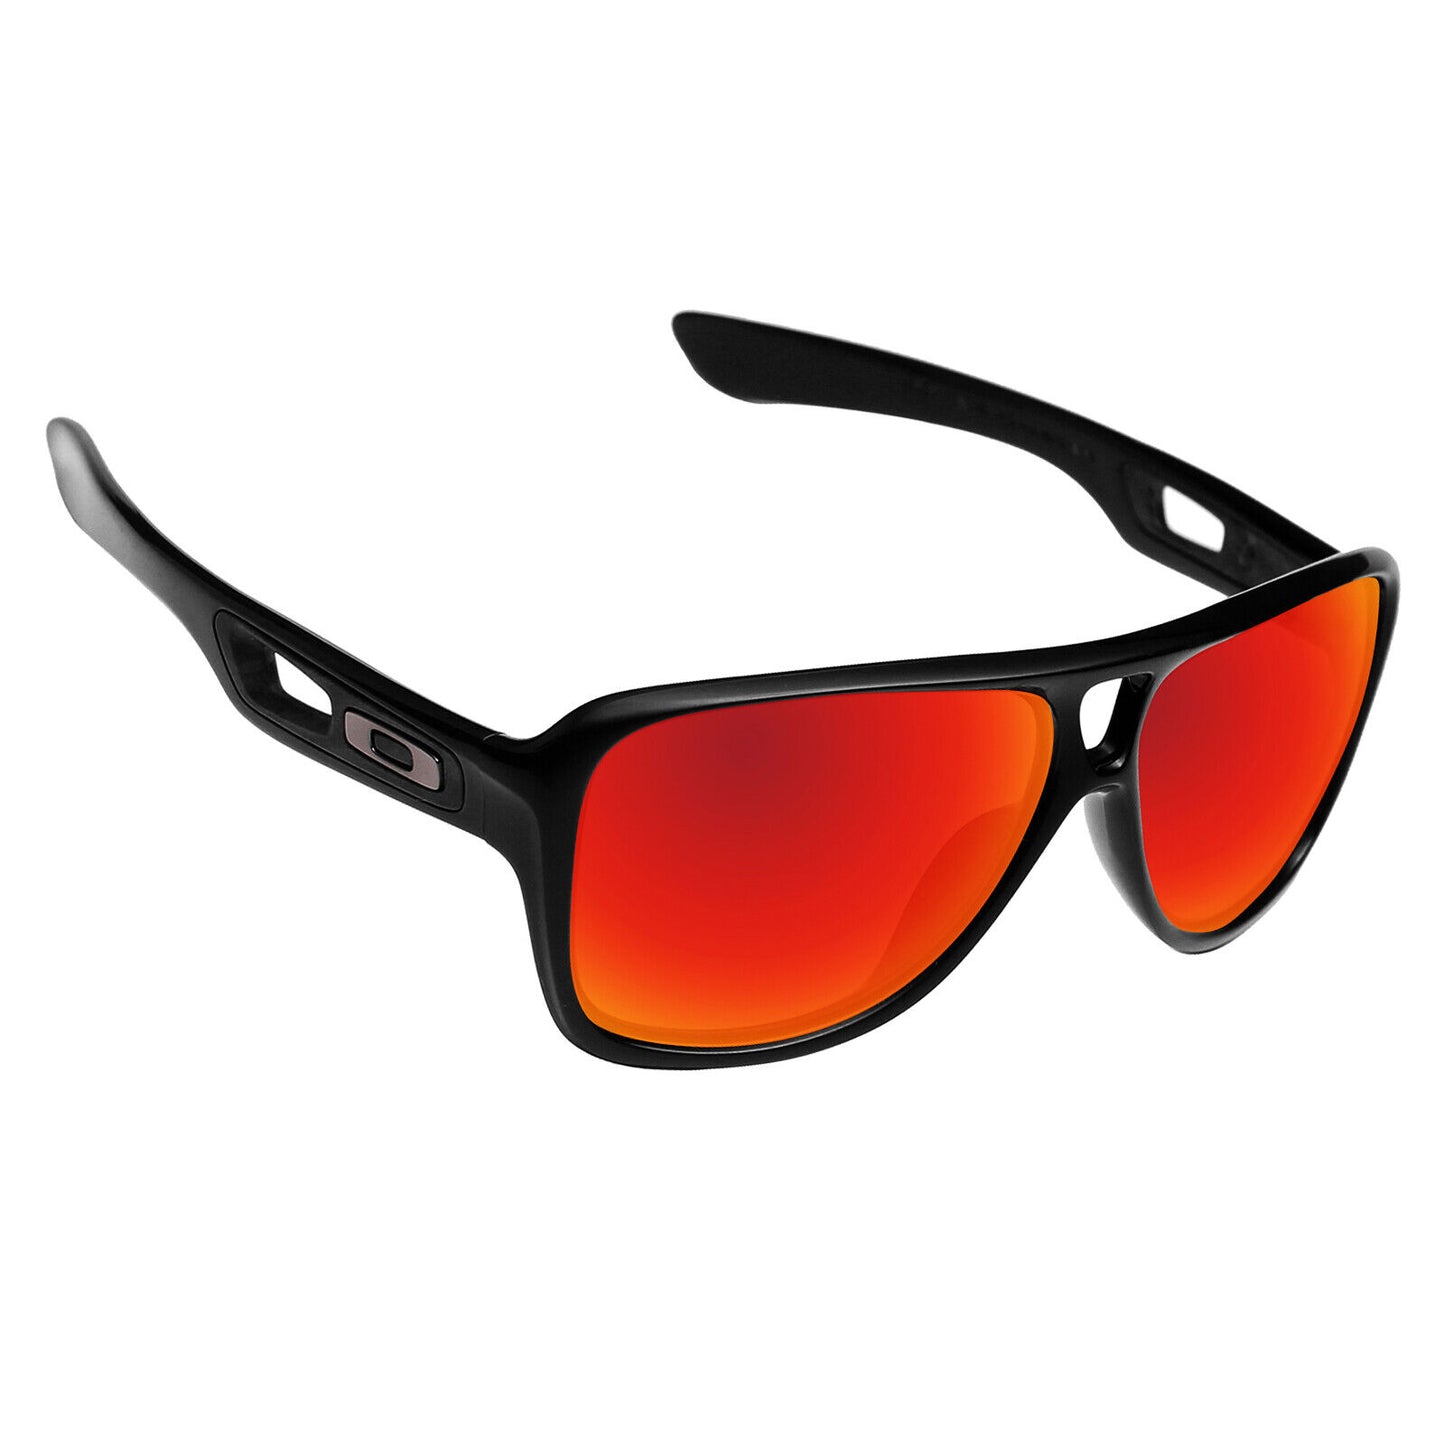 Hawkry Polycarbonate Replacement Lenses for-Oakley Sunglass Dispatch 2-Fire Red